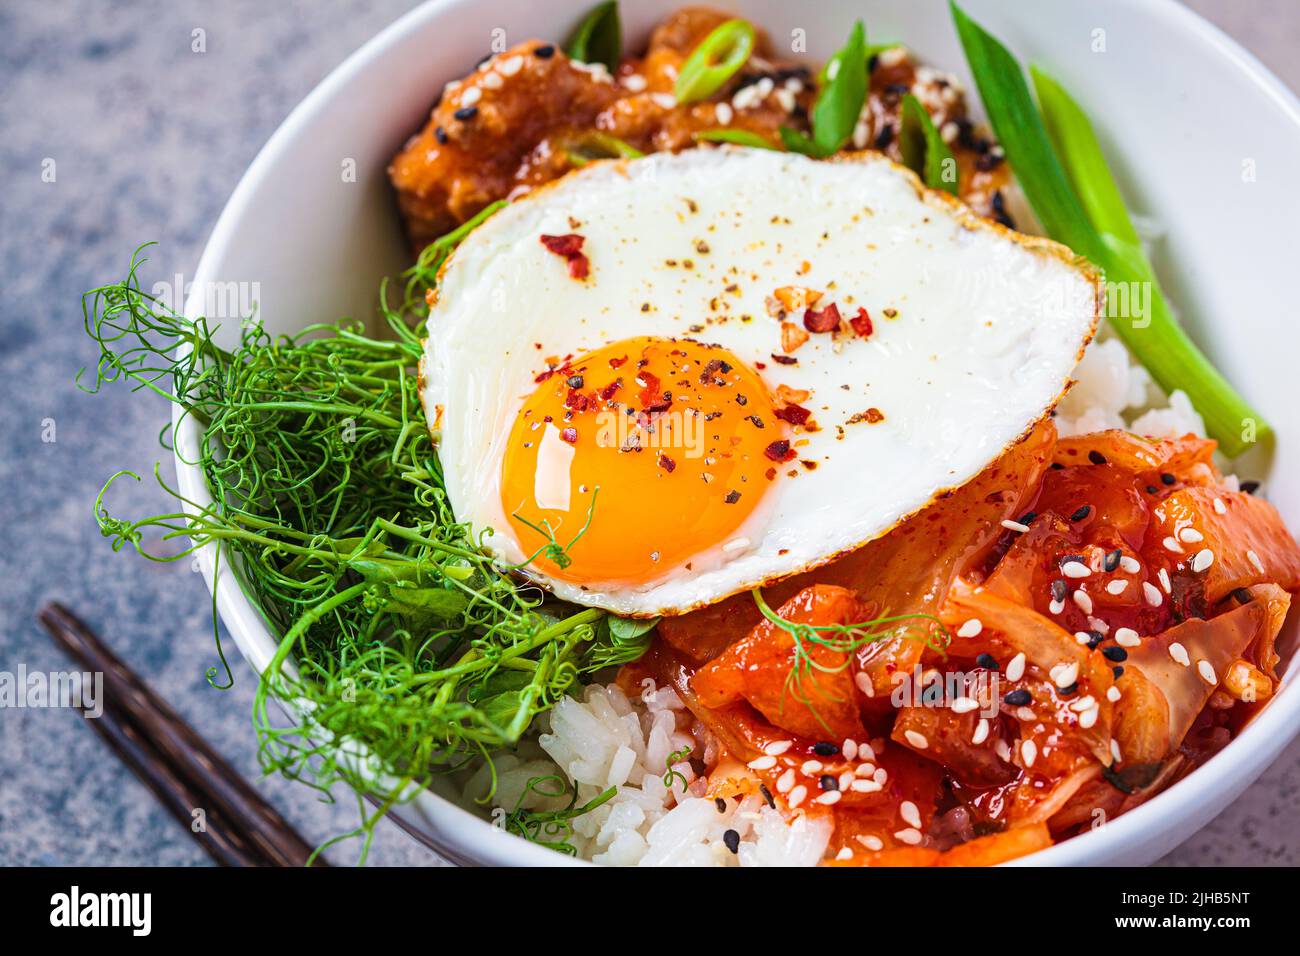 Bibimbap - meat, rice, kimchi, egg and sprouts in a white bowl. Traditional Korean food. Stock Photo